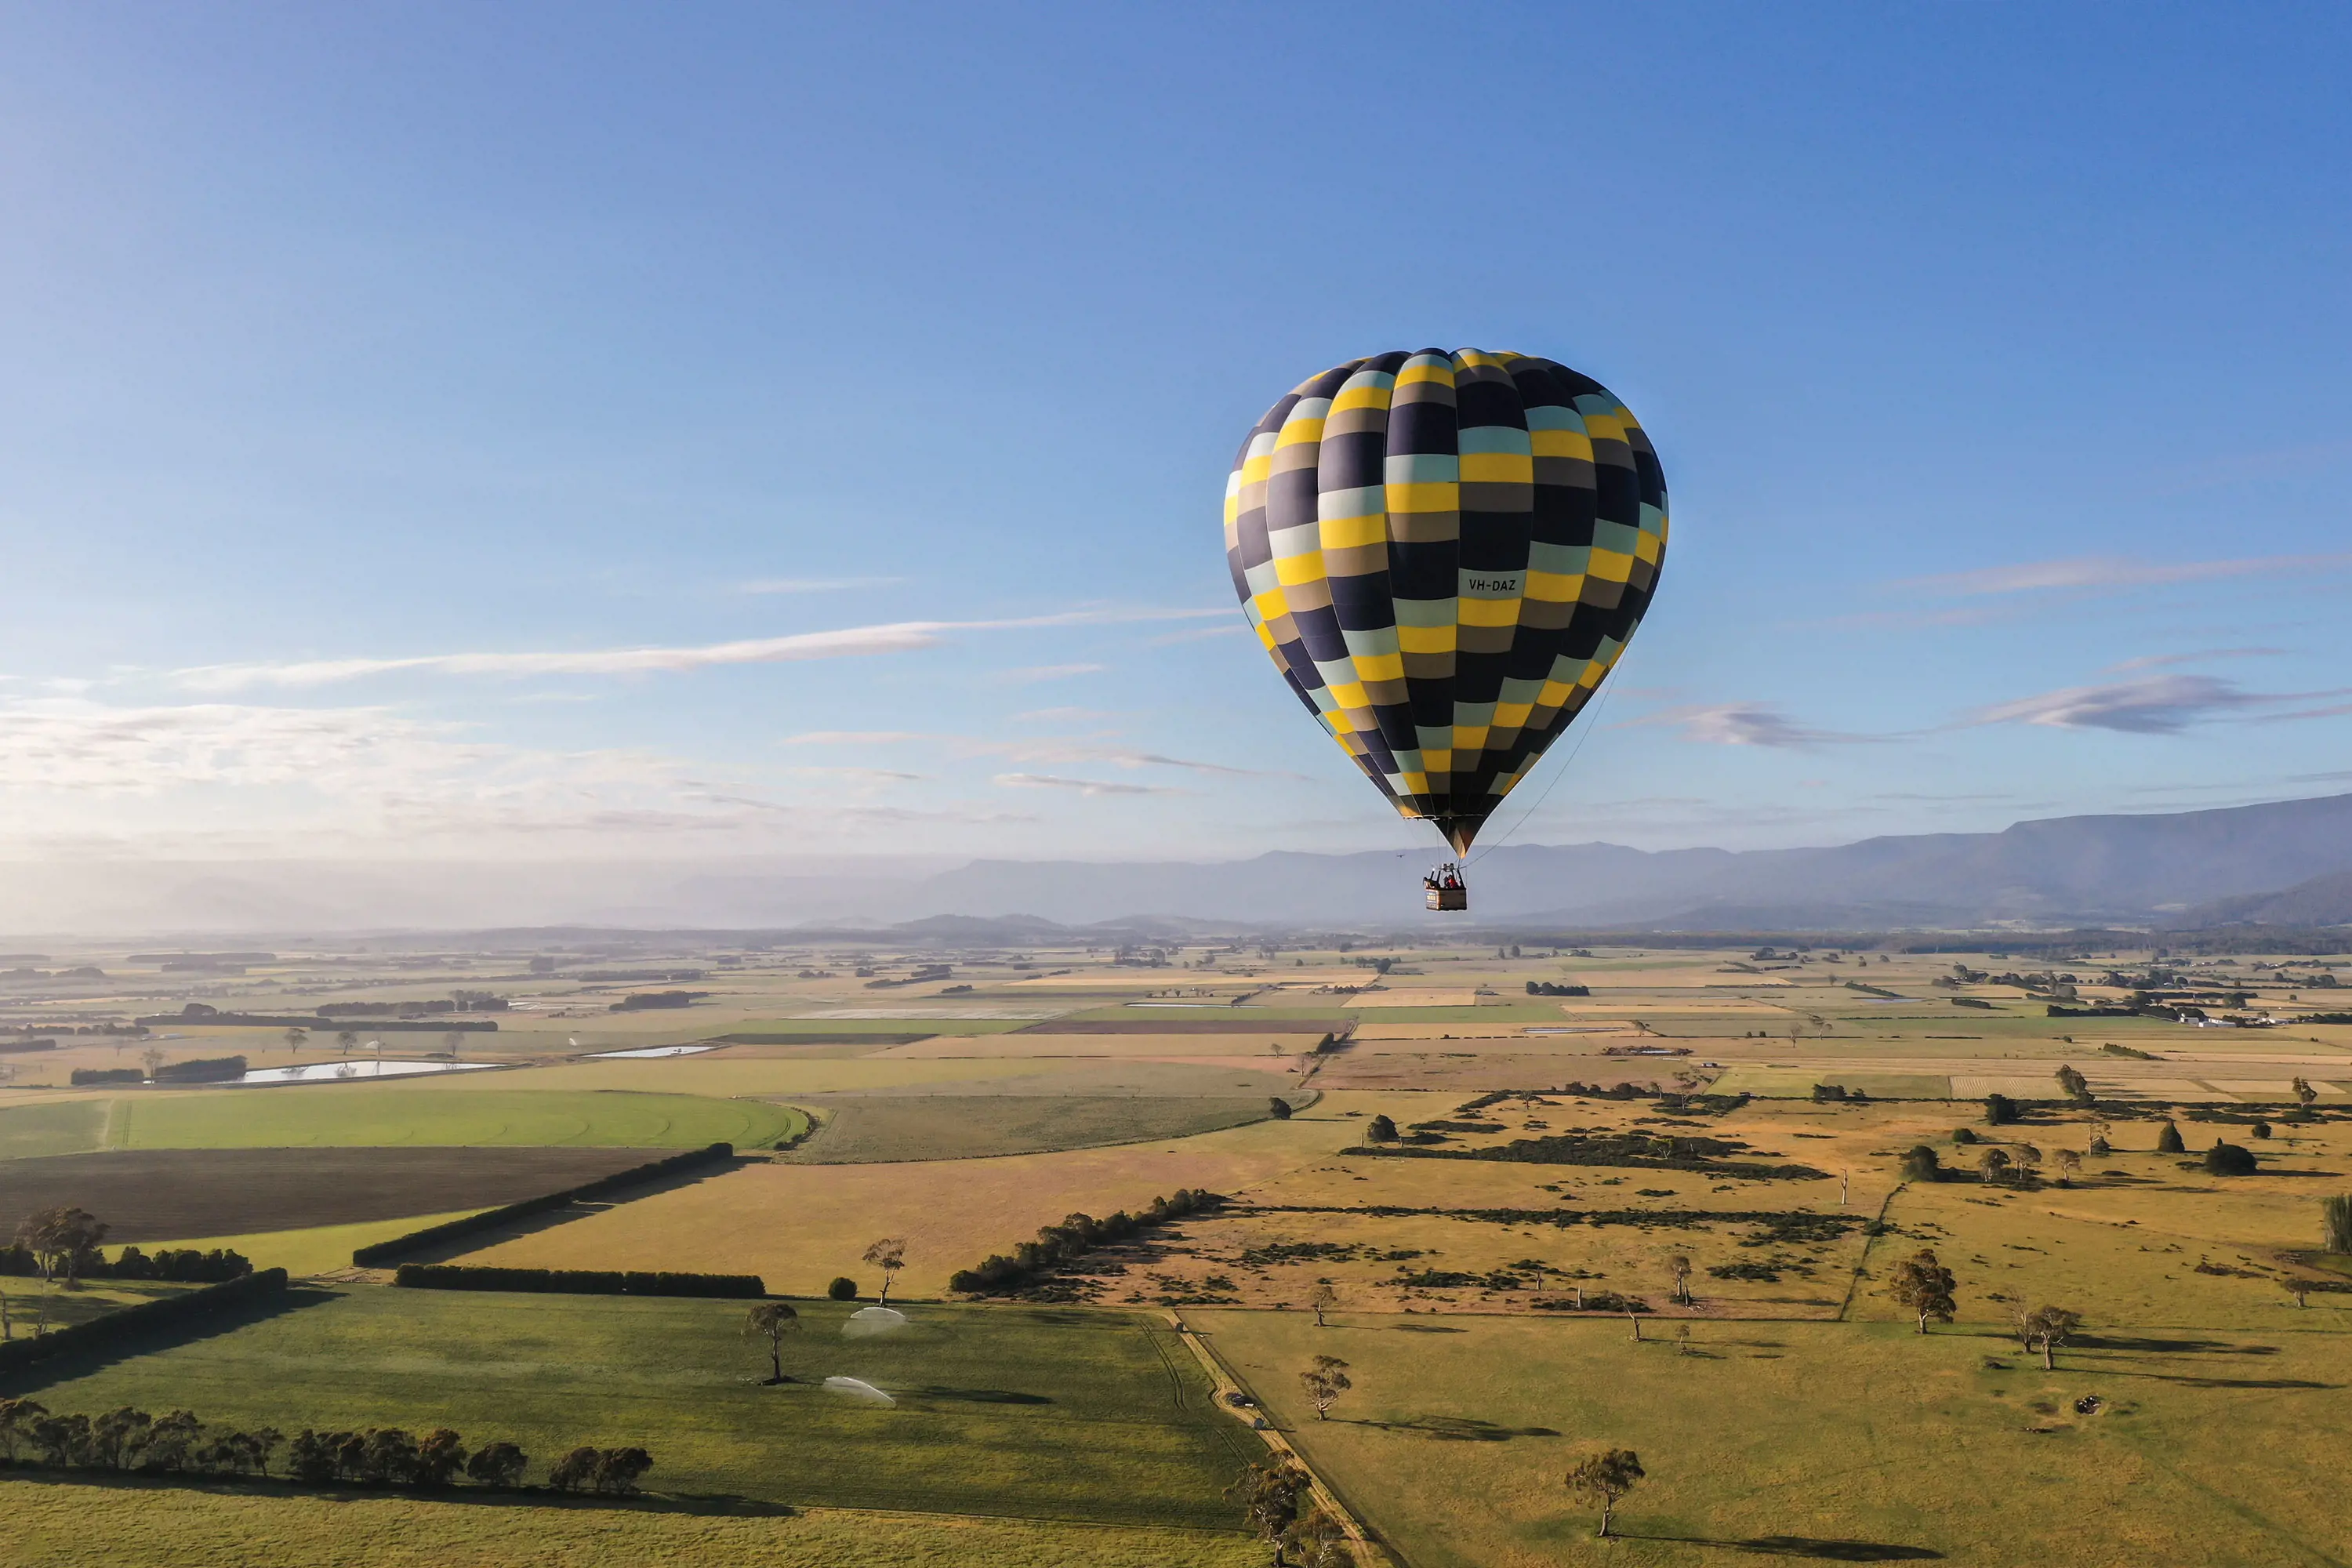 A large yellow and purple patterned air balloon sails peacefully over farmlands on a clear, sunny day.